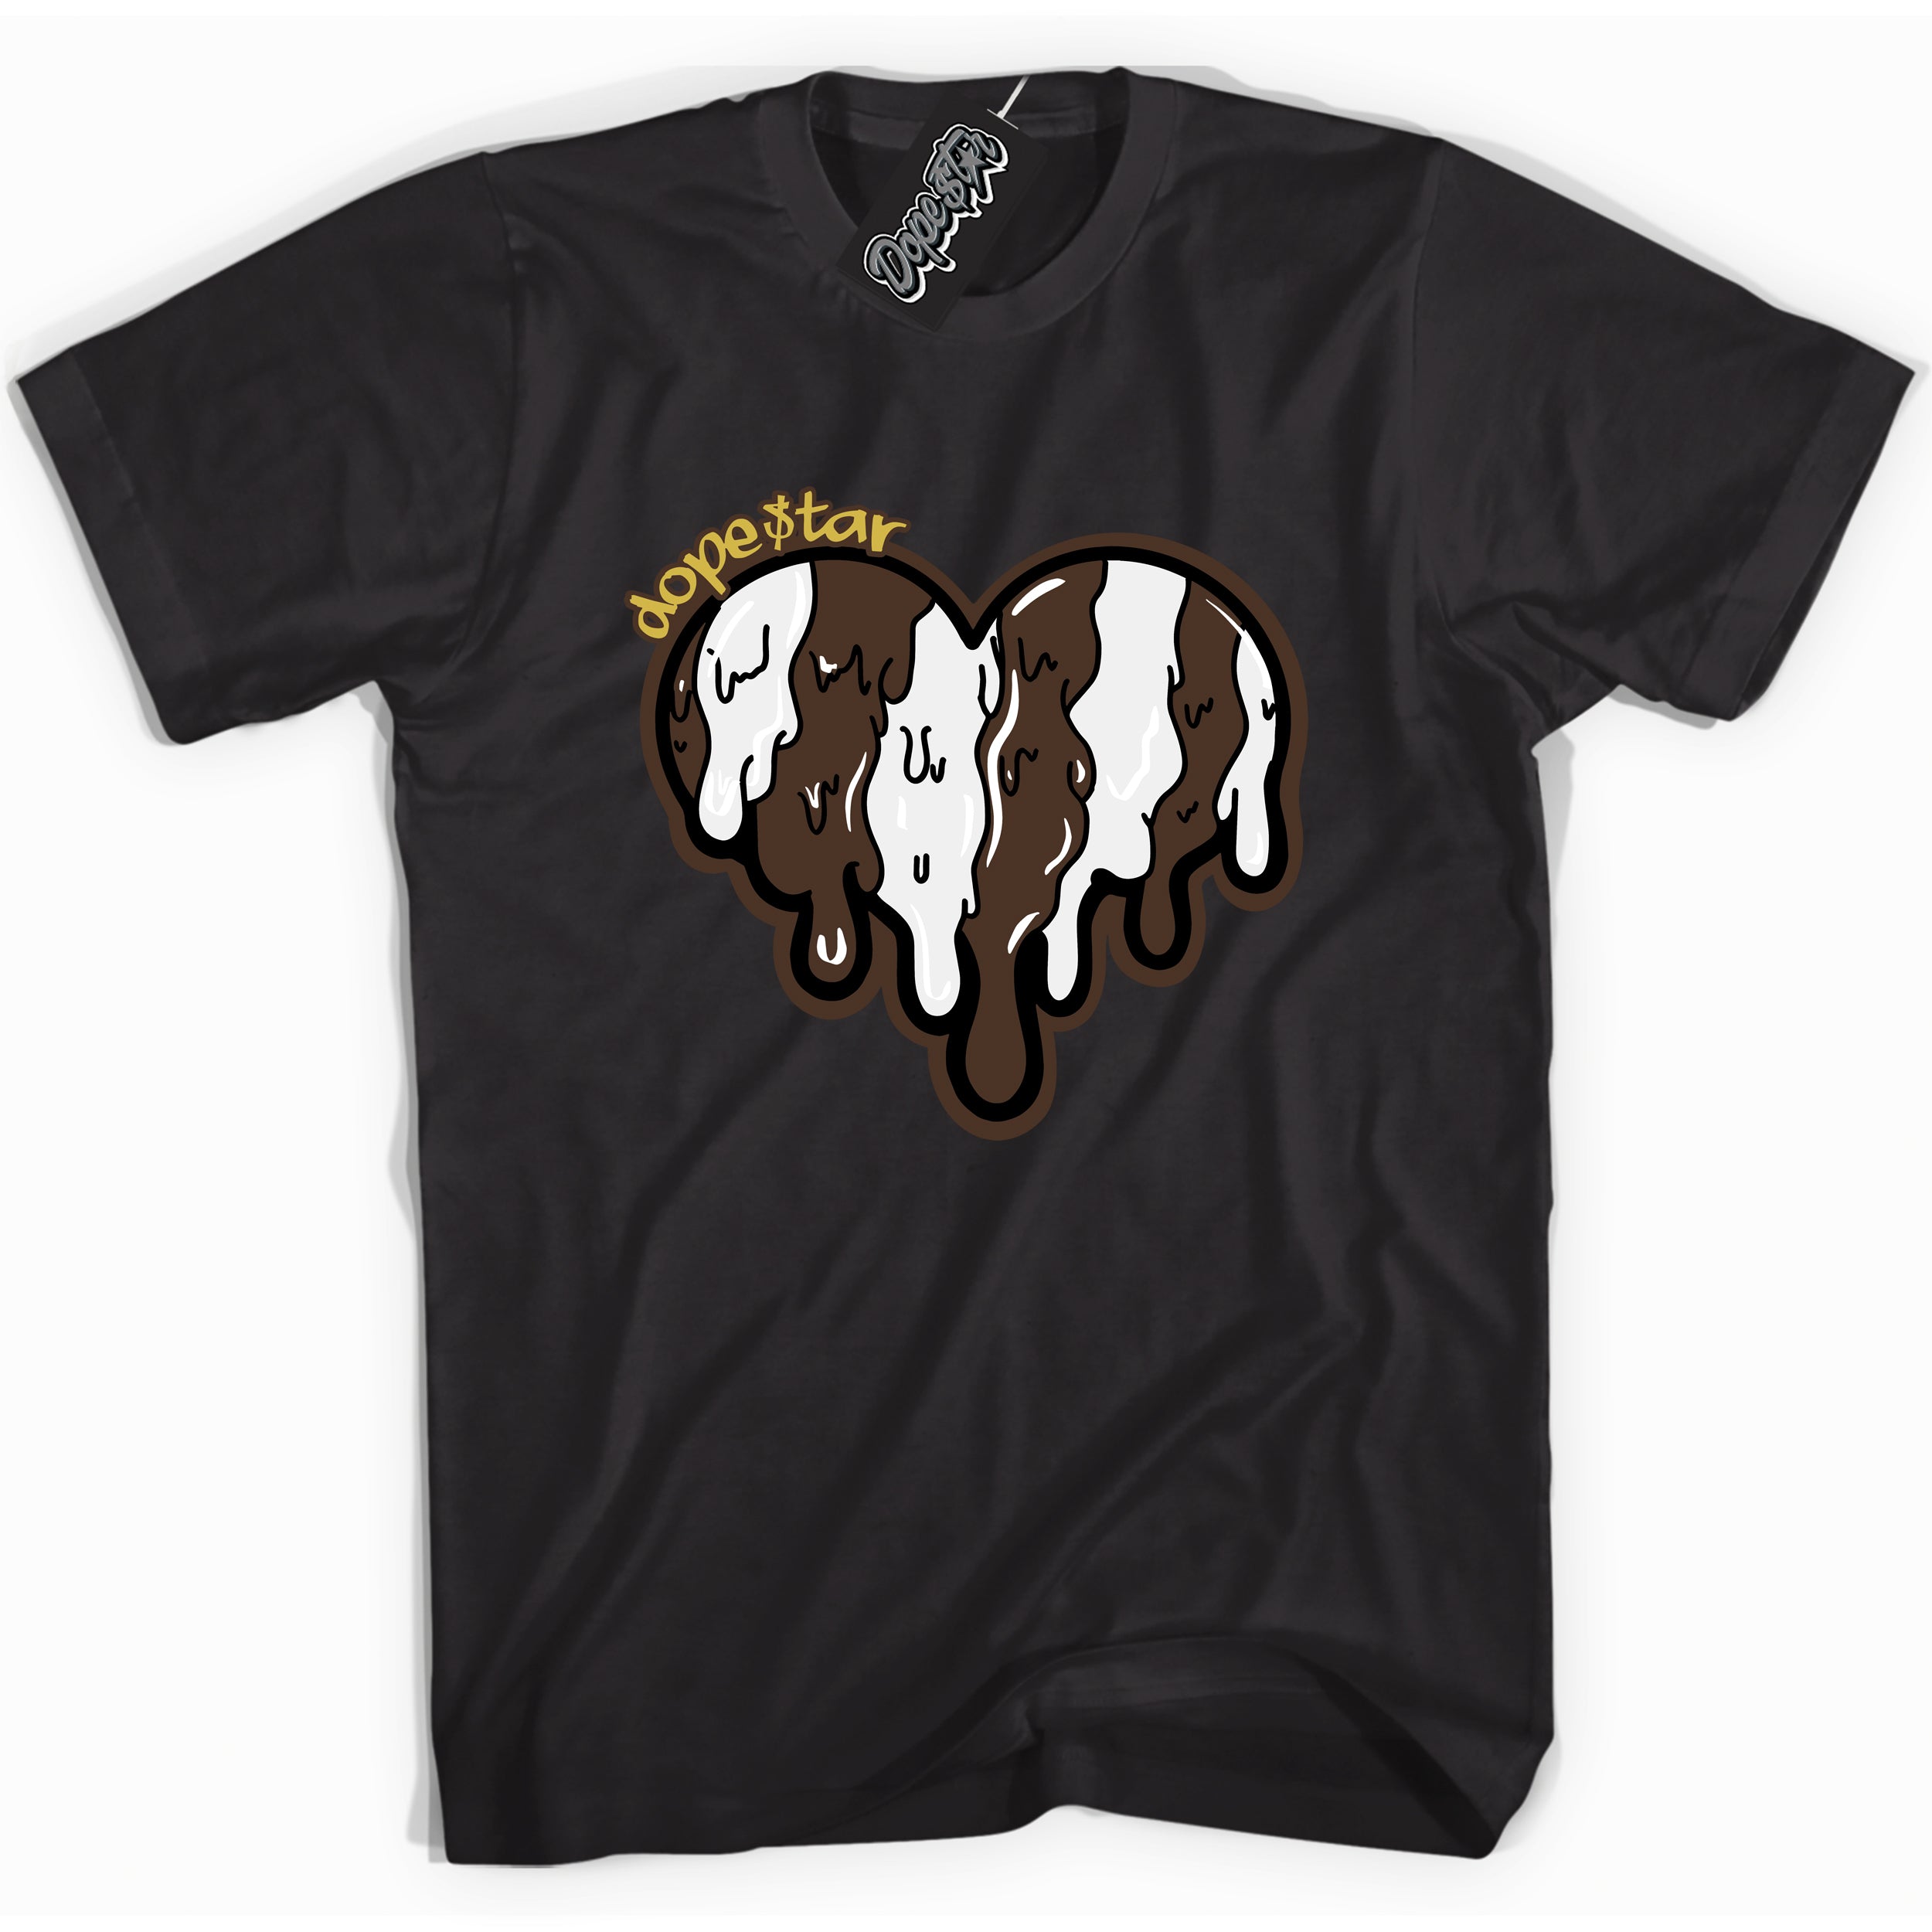 Cool Black graphic tee with “ Melting Heart ” design, that perfectly matches Palomino 1s sneakers 